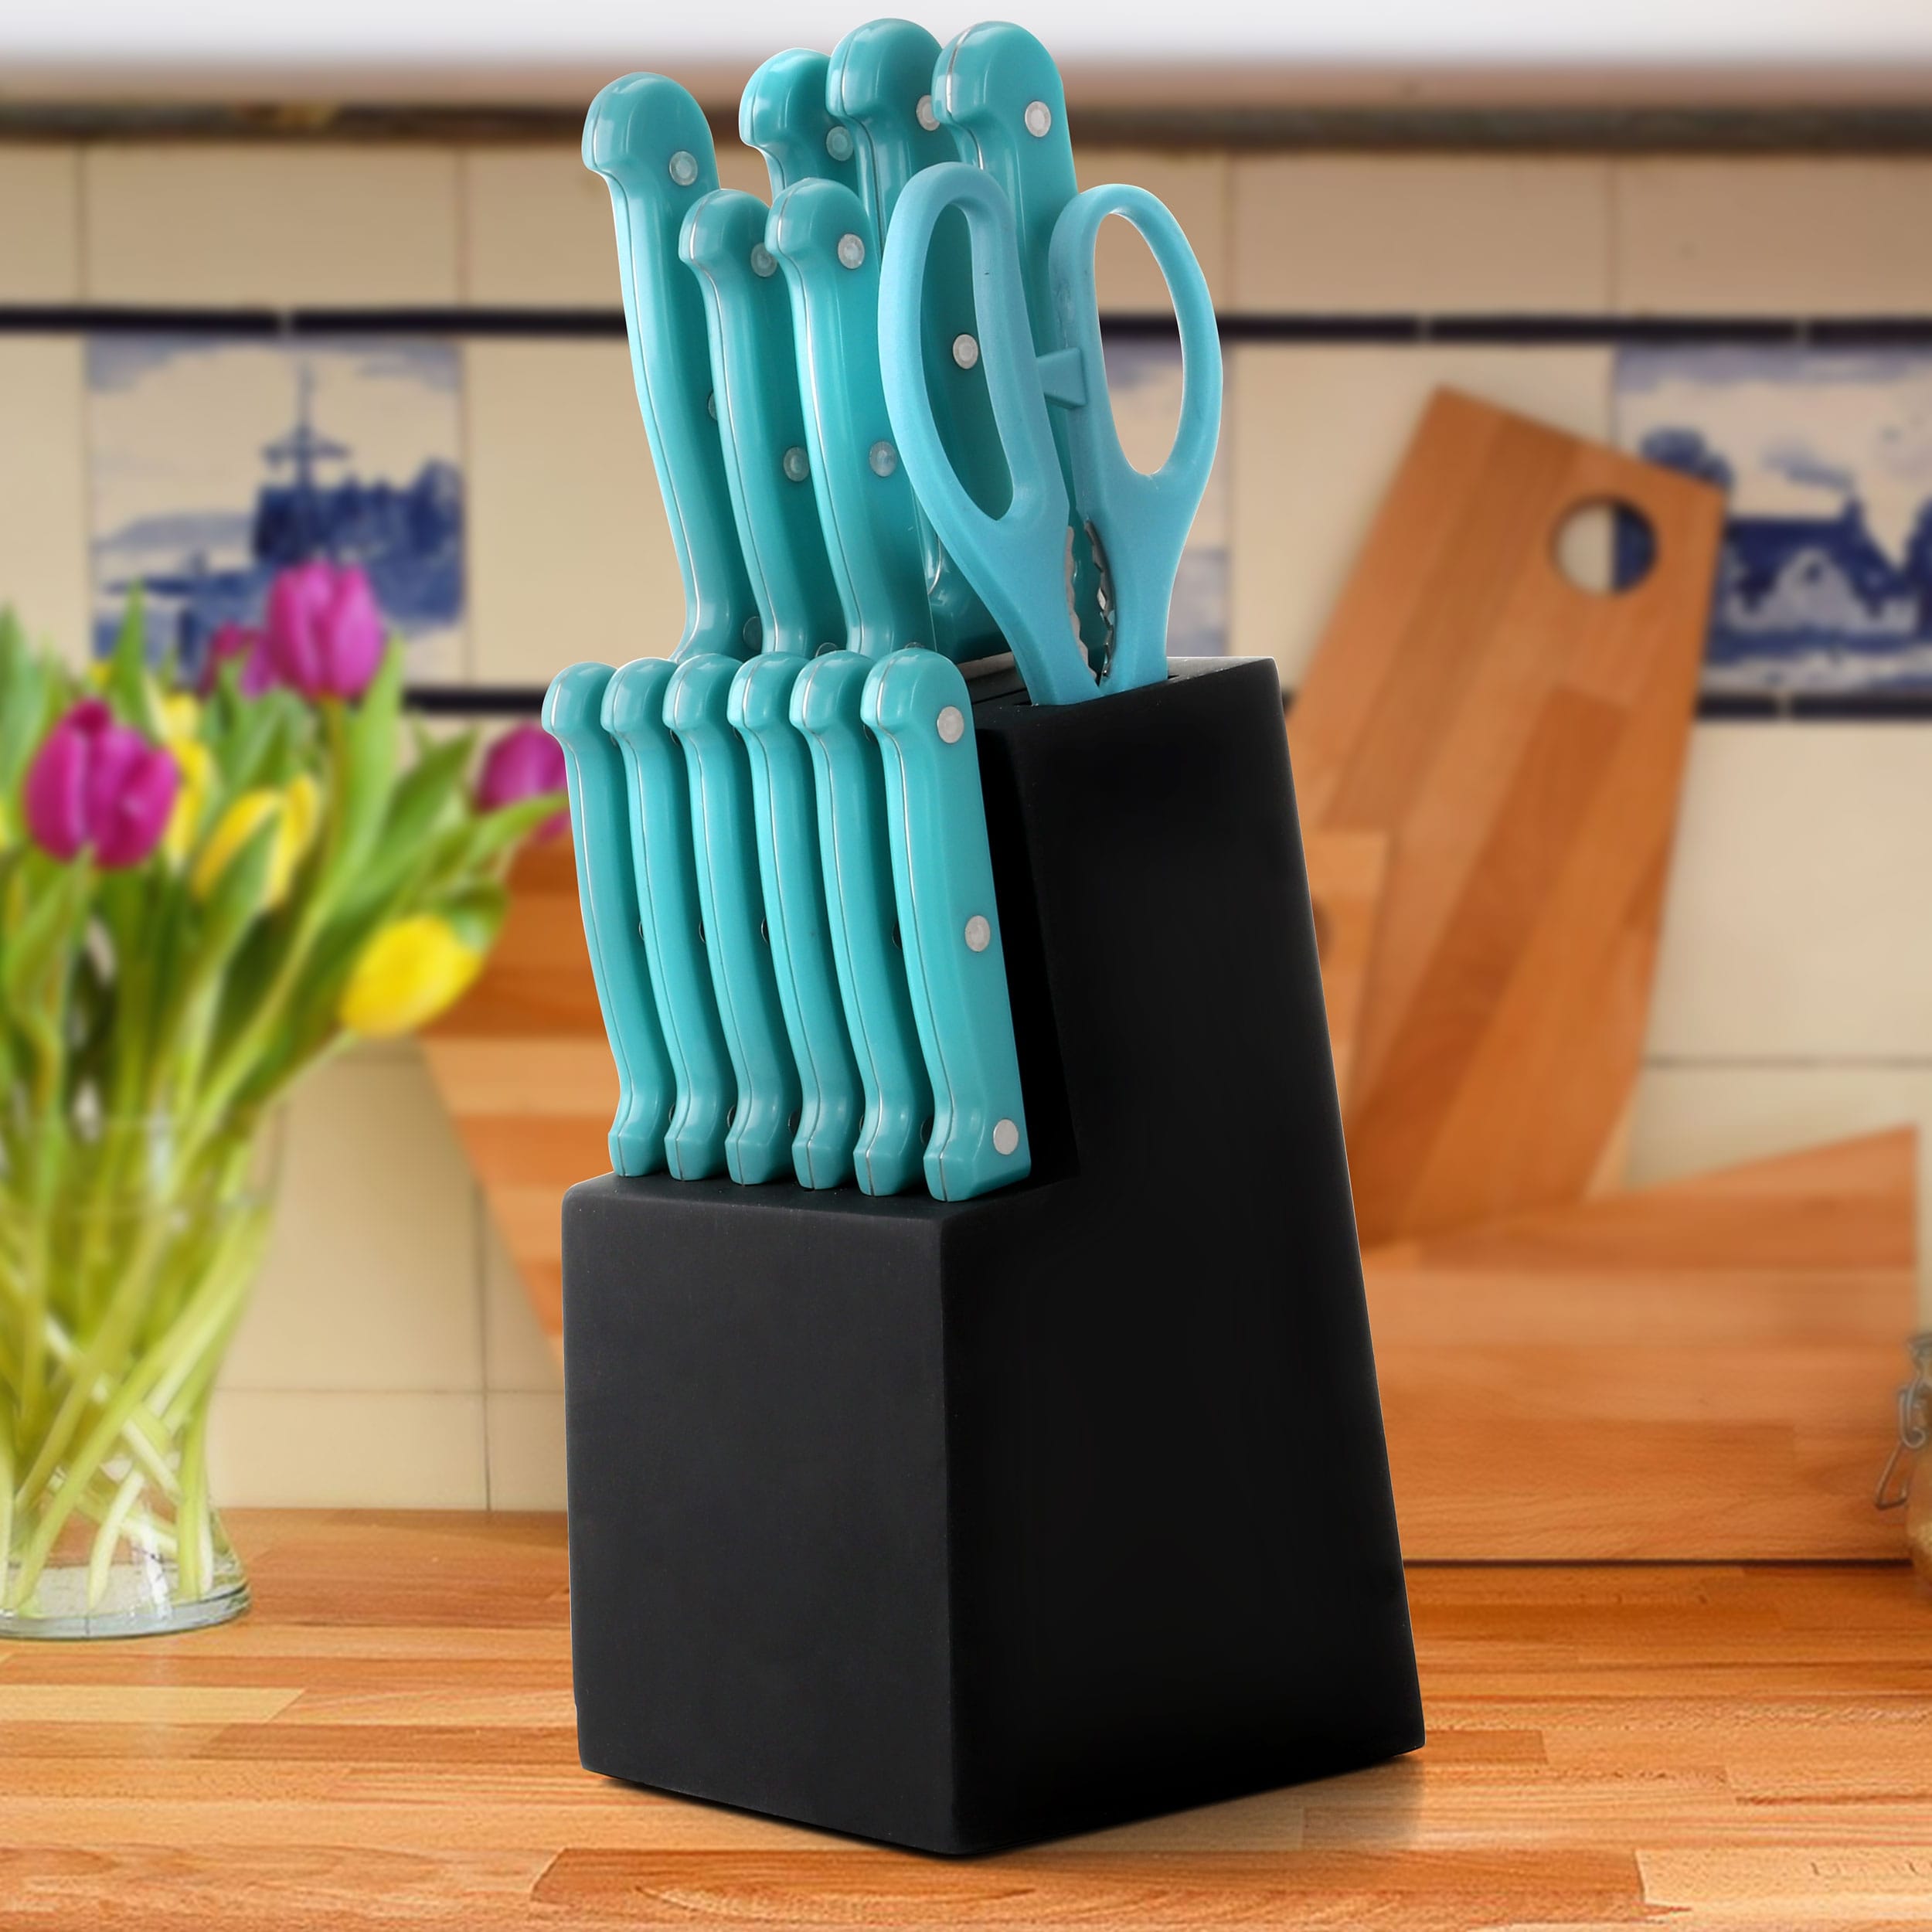 https://ak1.ostkcdn.com/images/products/is/images/direct/92be3593216dfe9cd58d13af0f1bab3dff500bff/MegaChef-14-Piece-Cutlery-Set-in-Teal.jpg